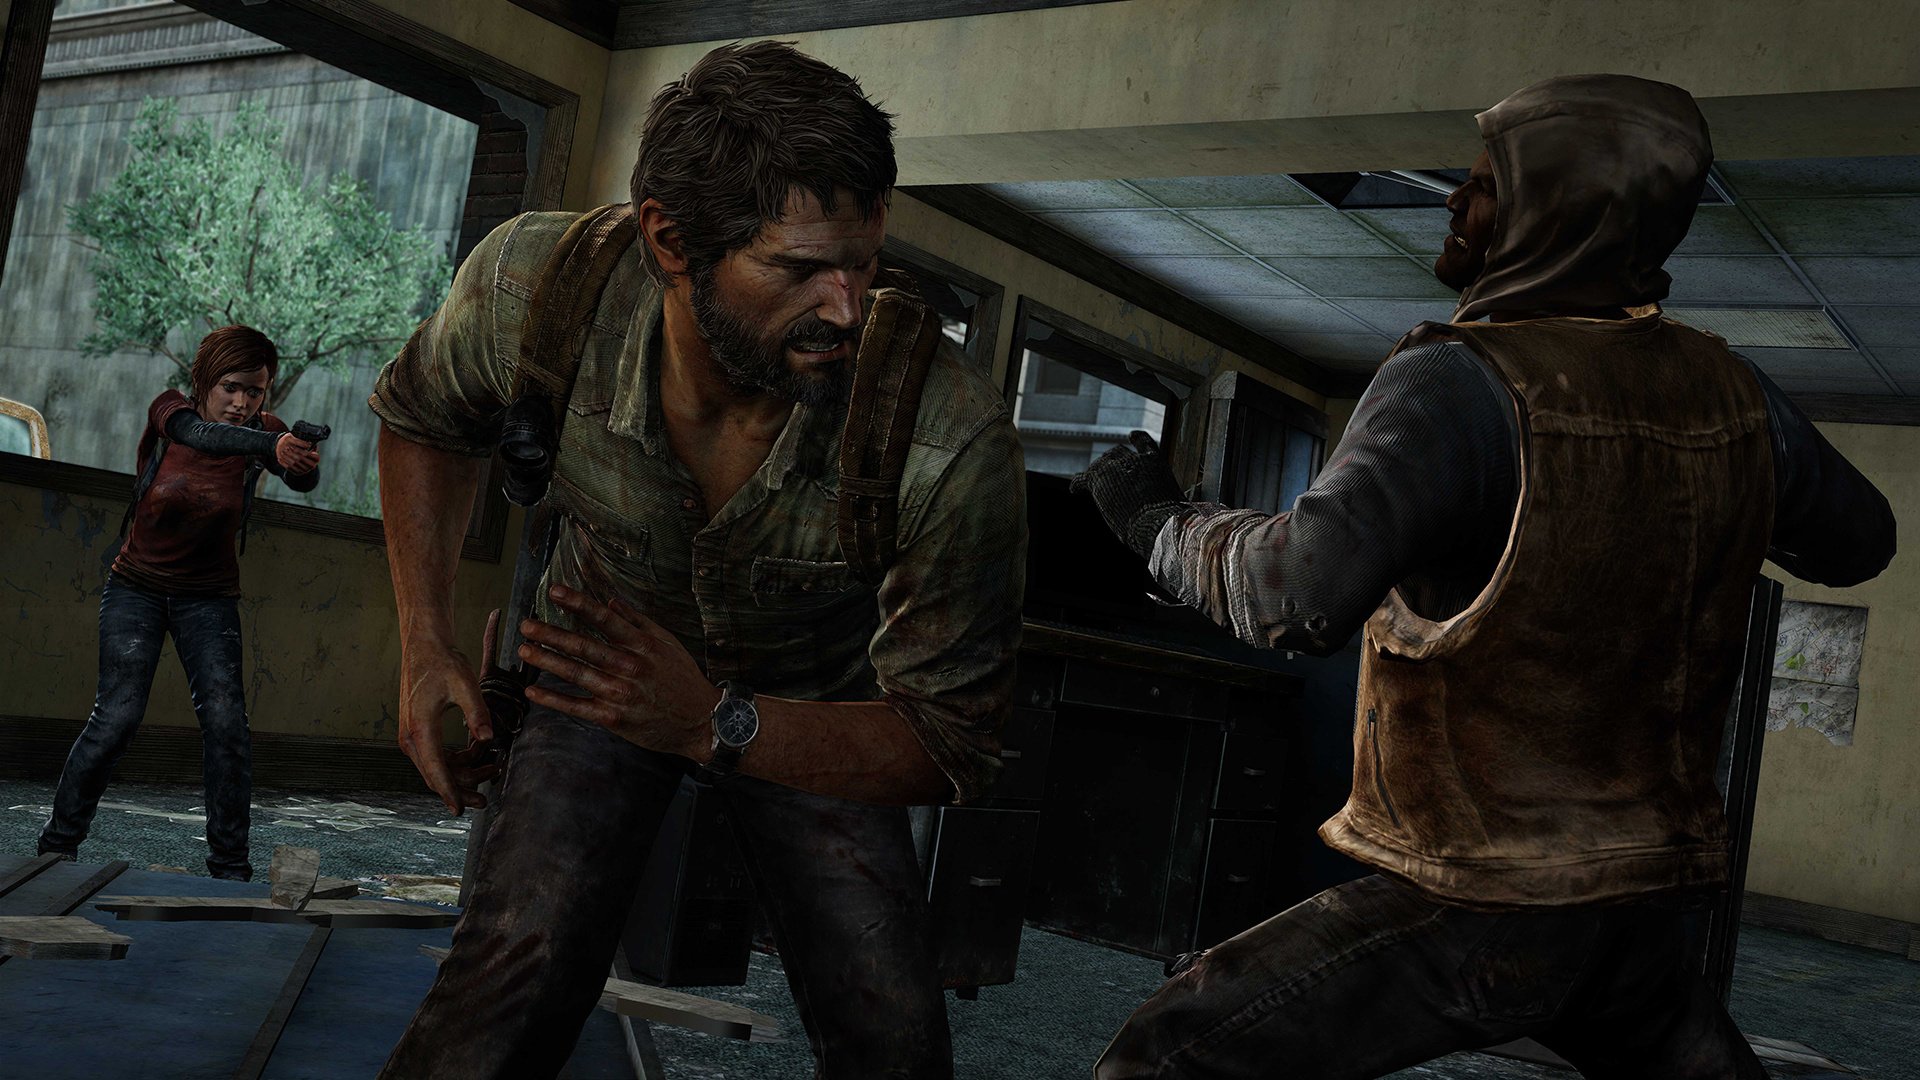 the last of us remastered price